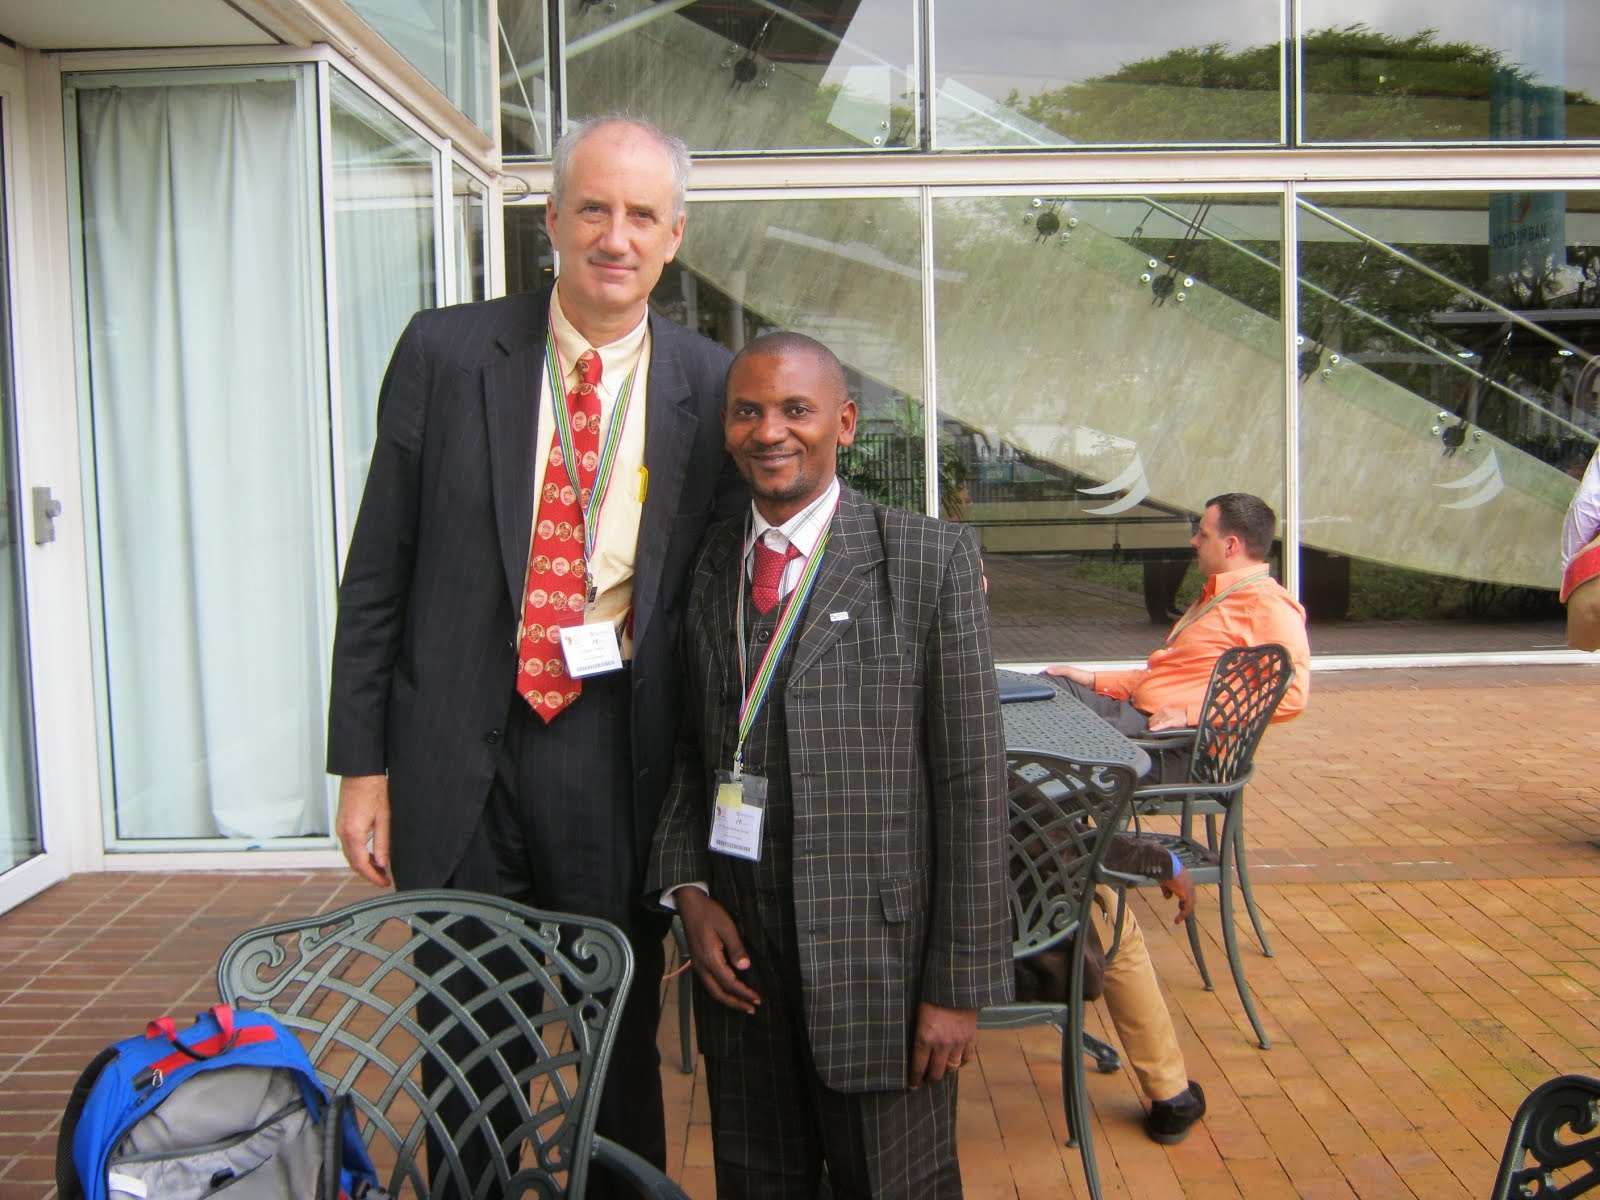 AORTIC 2013 conference and ACLI meeting in Durban